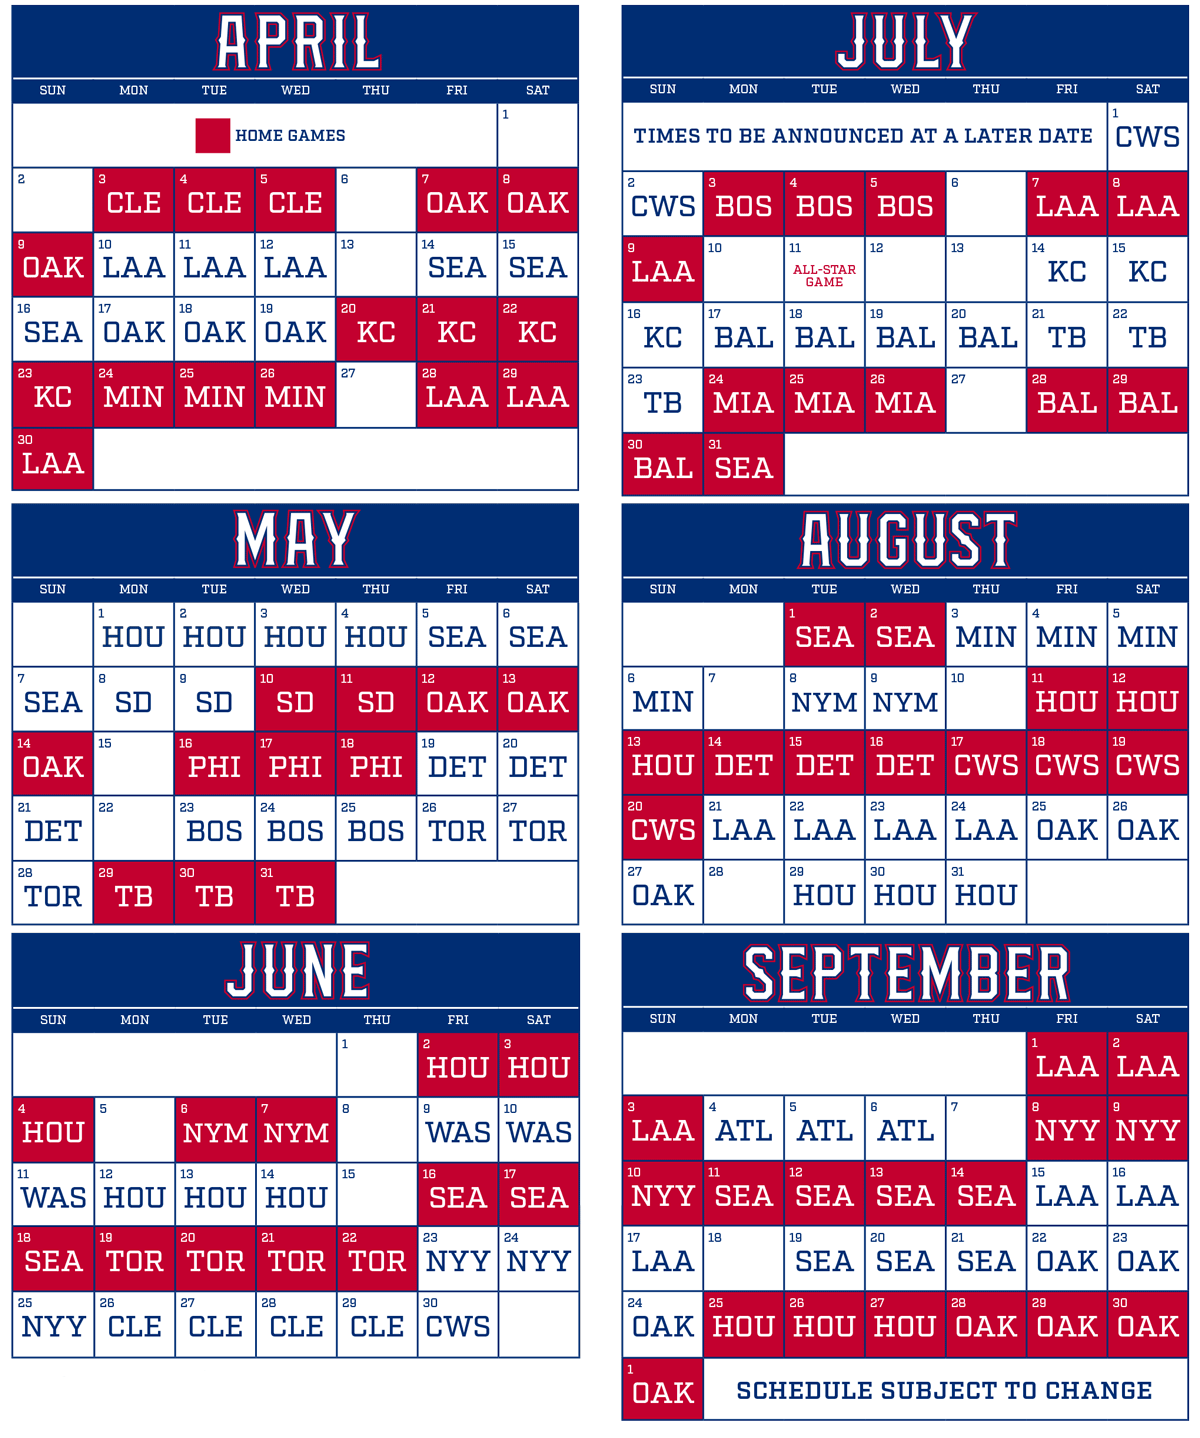 Rangers 2017 schedule released: Texas to open next season at home, play